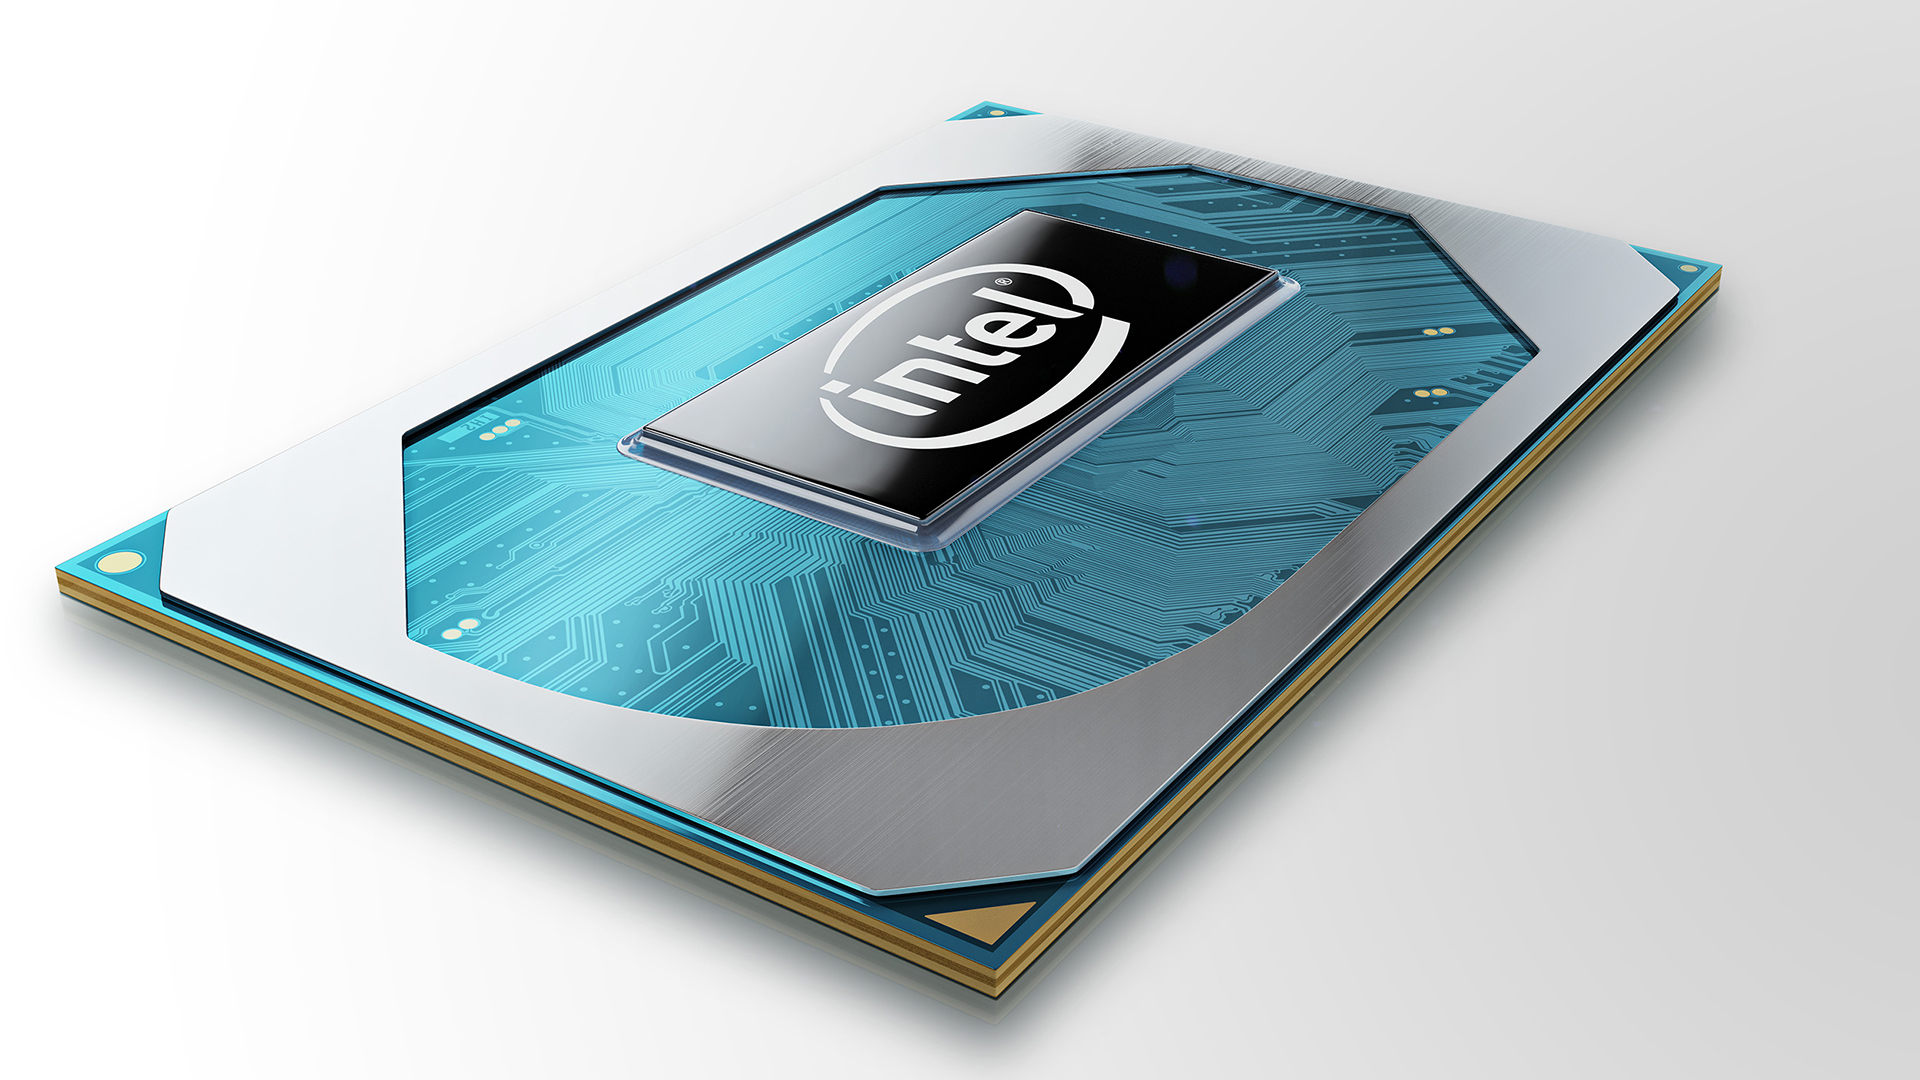 intel’s-tiger-lake-h-family-leaks:-five-8-core-and-6-core-models